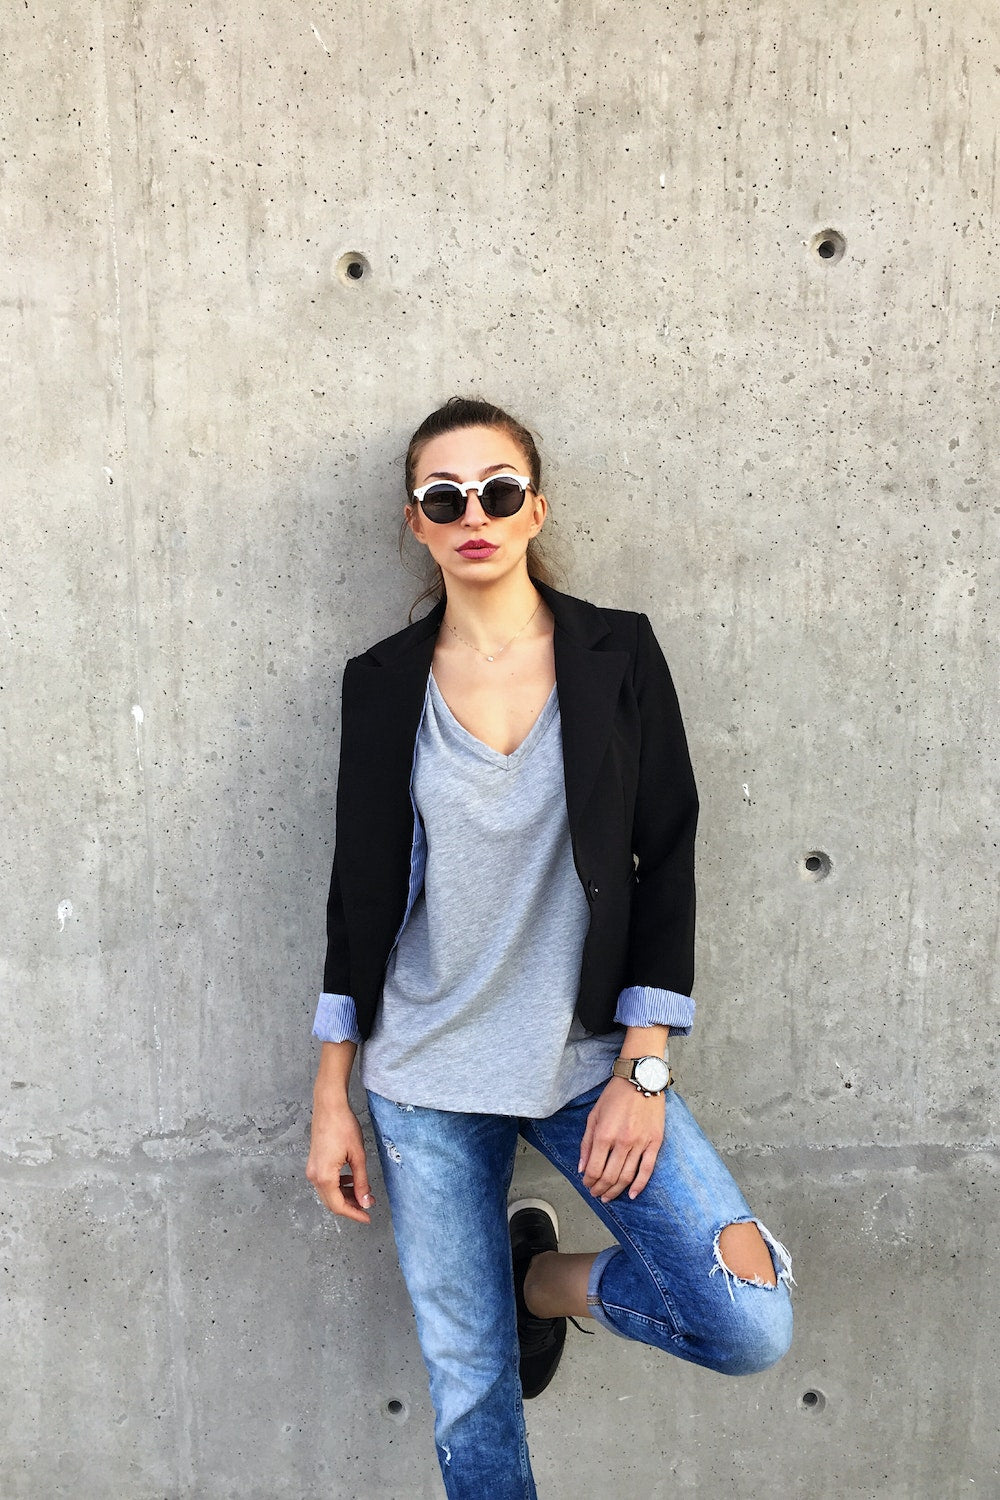 Tinder date outfits blazer